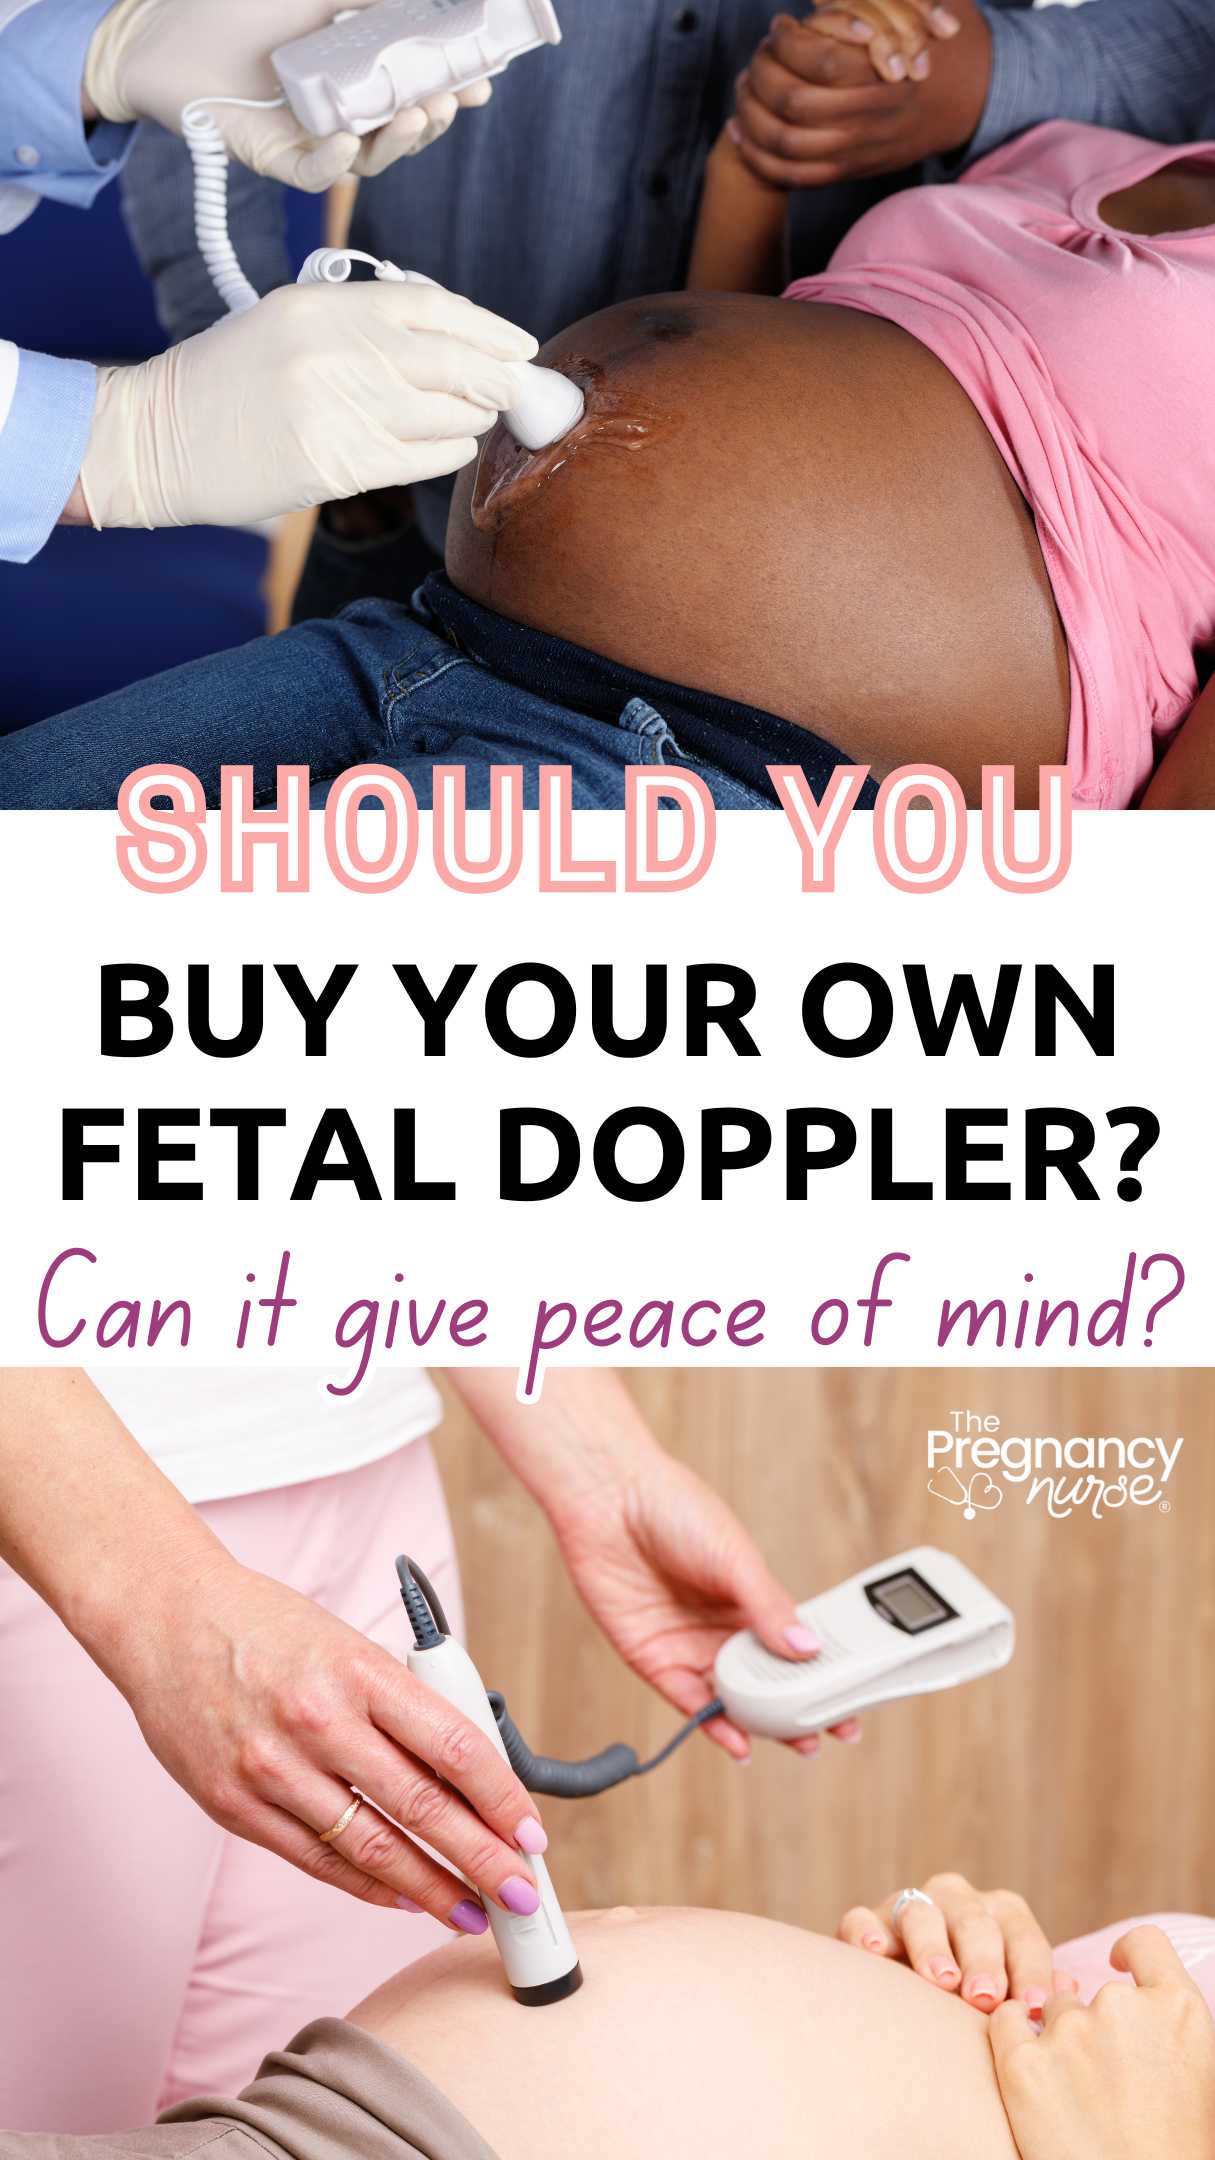 Are you considering getting your own fetal doppler? 🤔 Check out our fun and informative guide to help you decide whether it's a smart choice or not! 🎉🎉